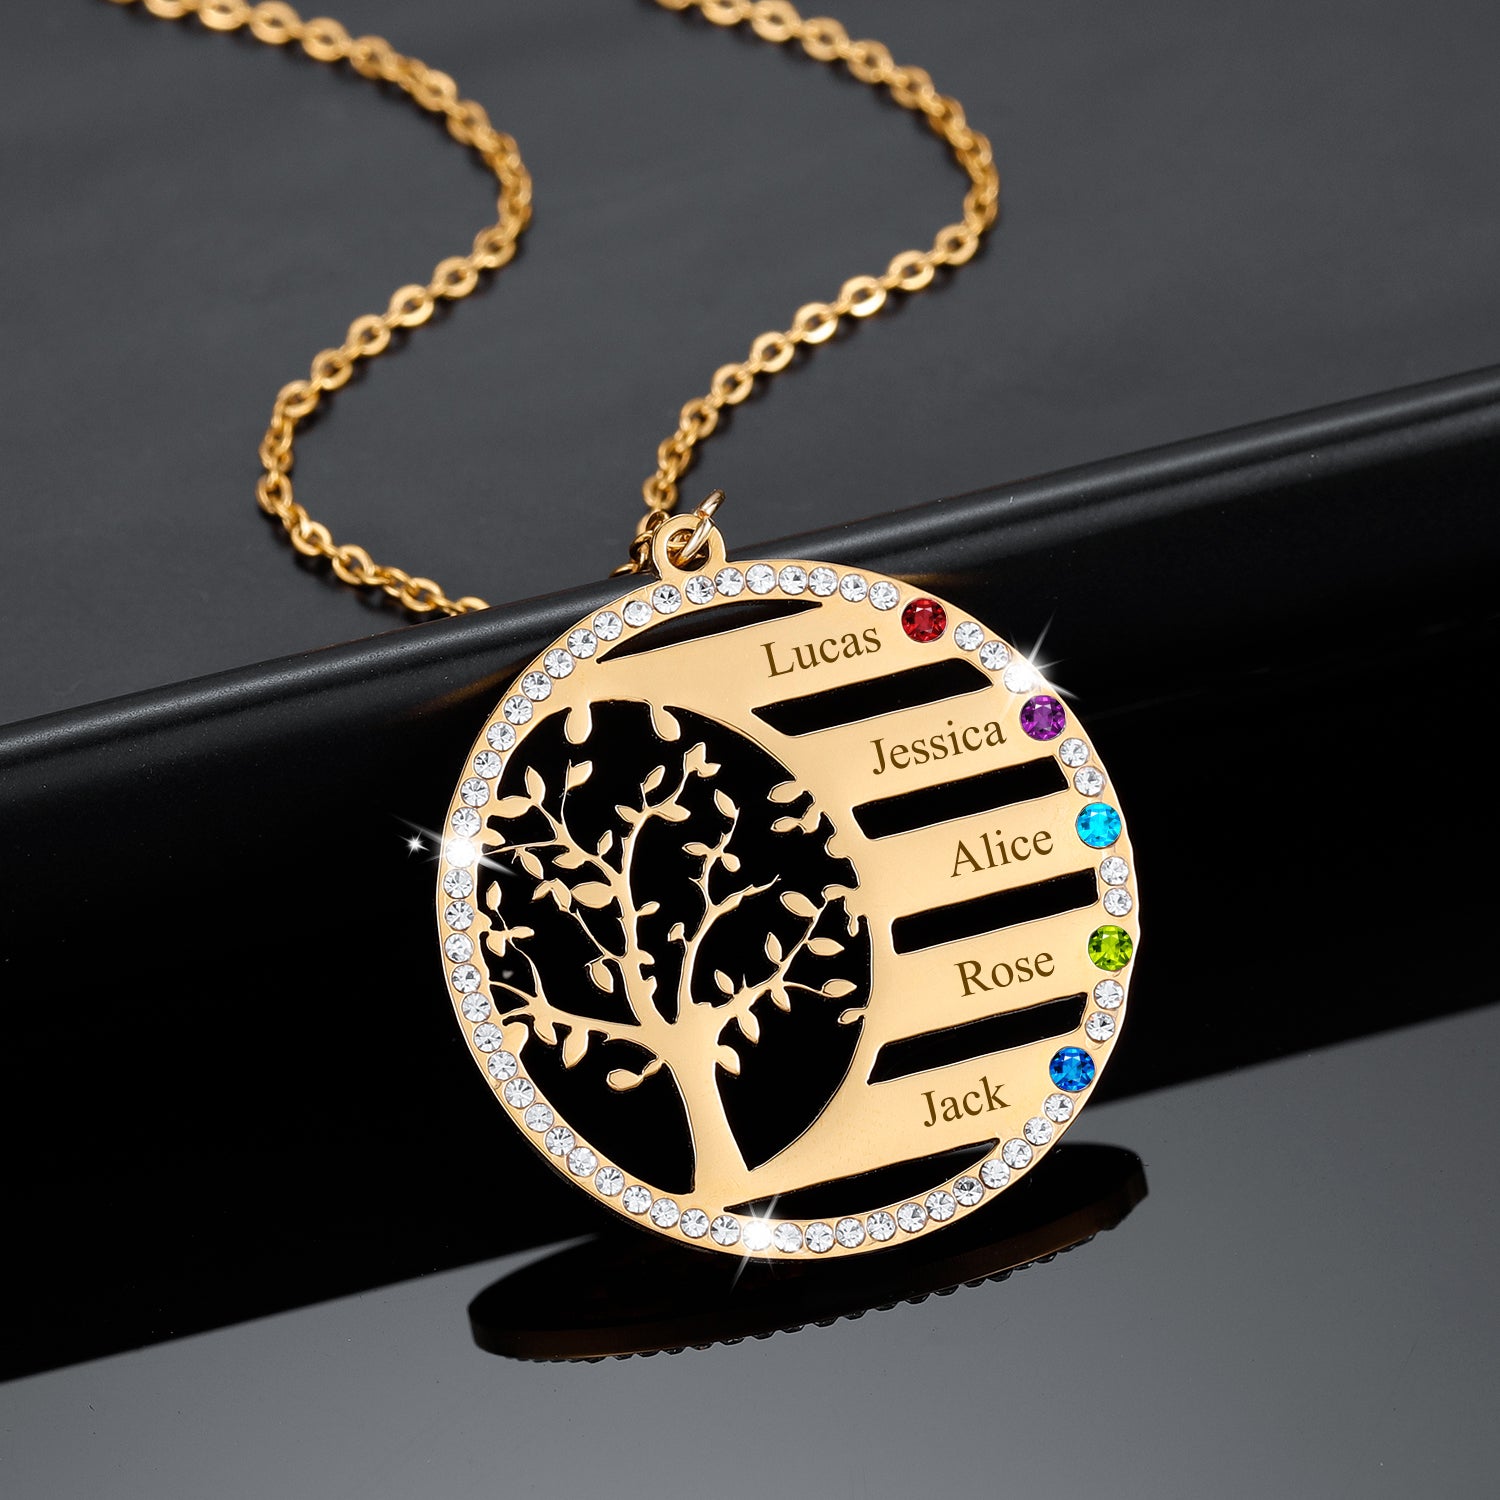 Personalized Birthstone Family Tree Necklace